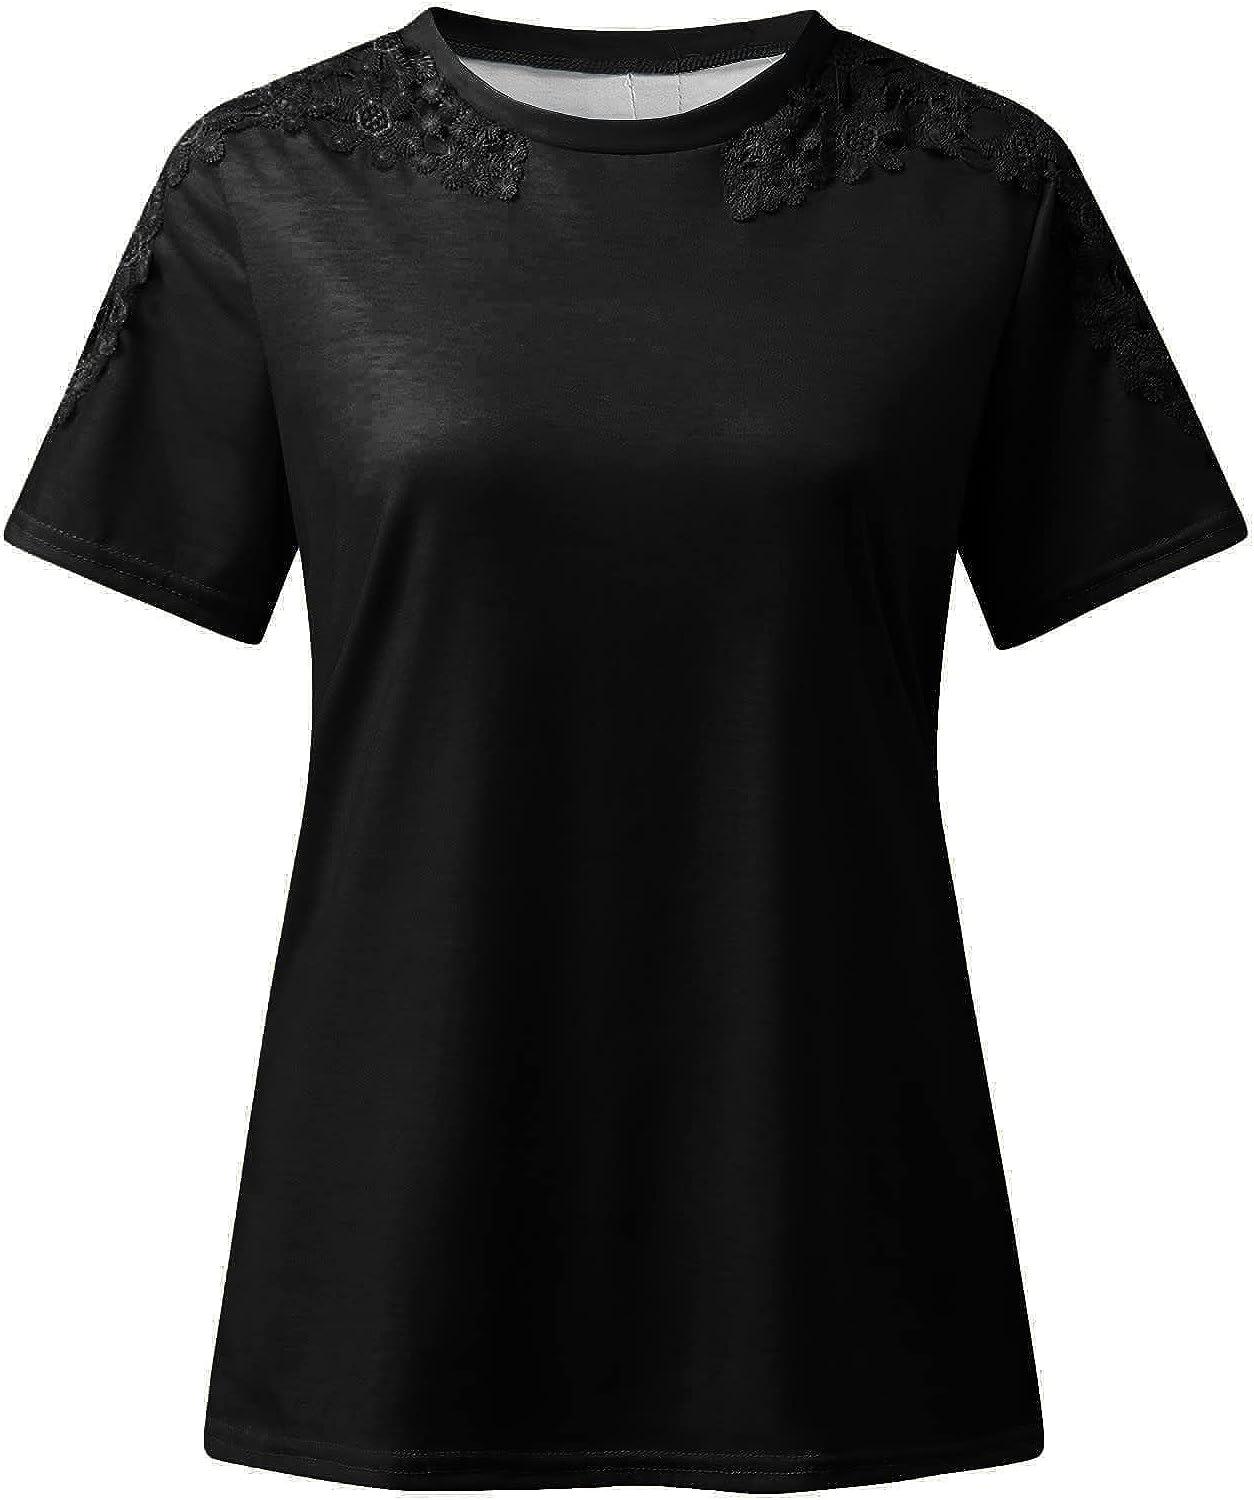 CARCOS Plus Size Tops for Women 3X Short Sleeve T Shirts Basic V Neck  Summer Black Blouses Casual Loose Fit Solid Color Tunics 3XL 22W 24W -  Basic-black 